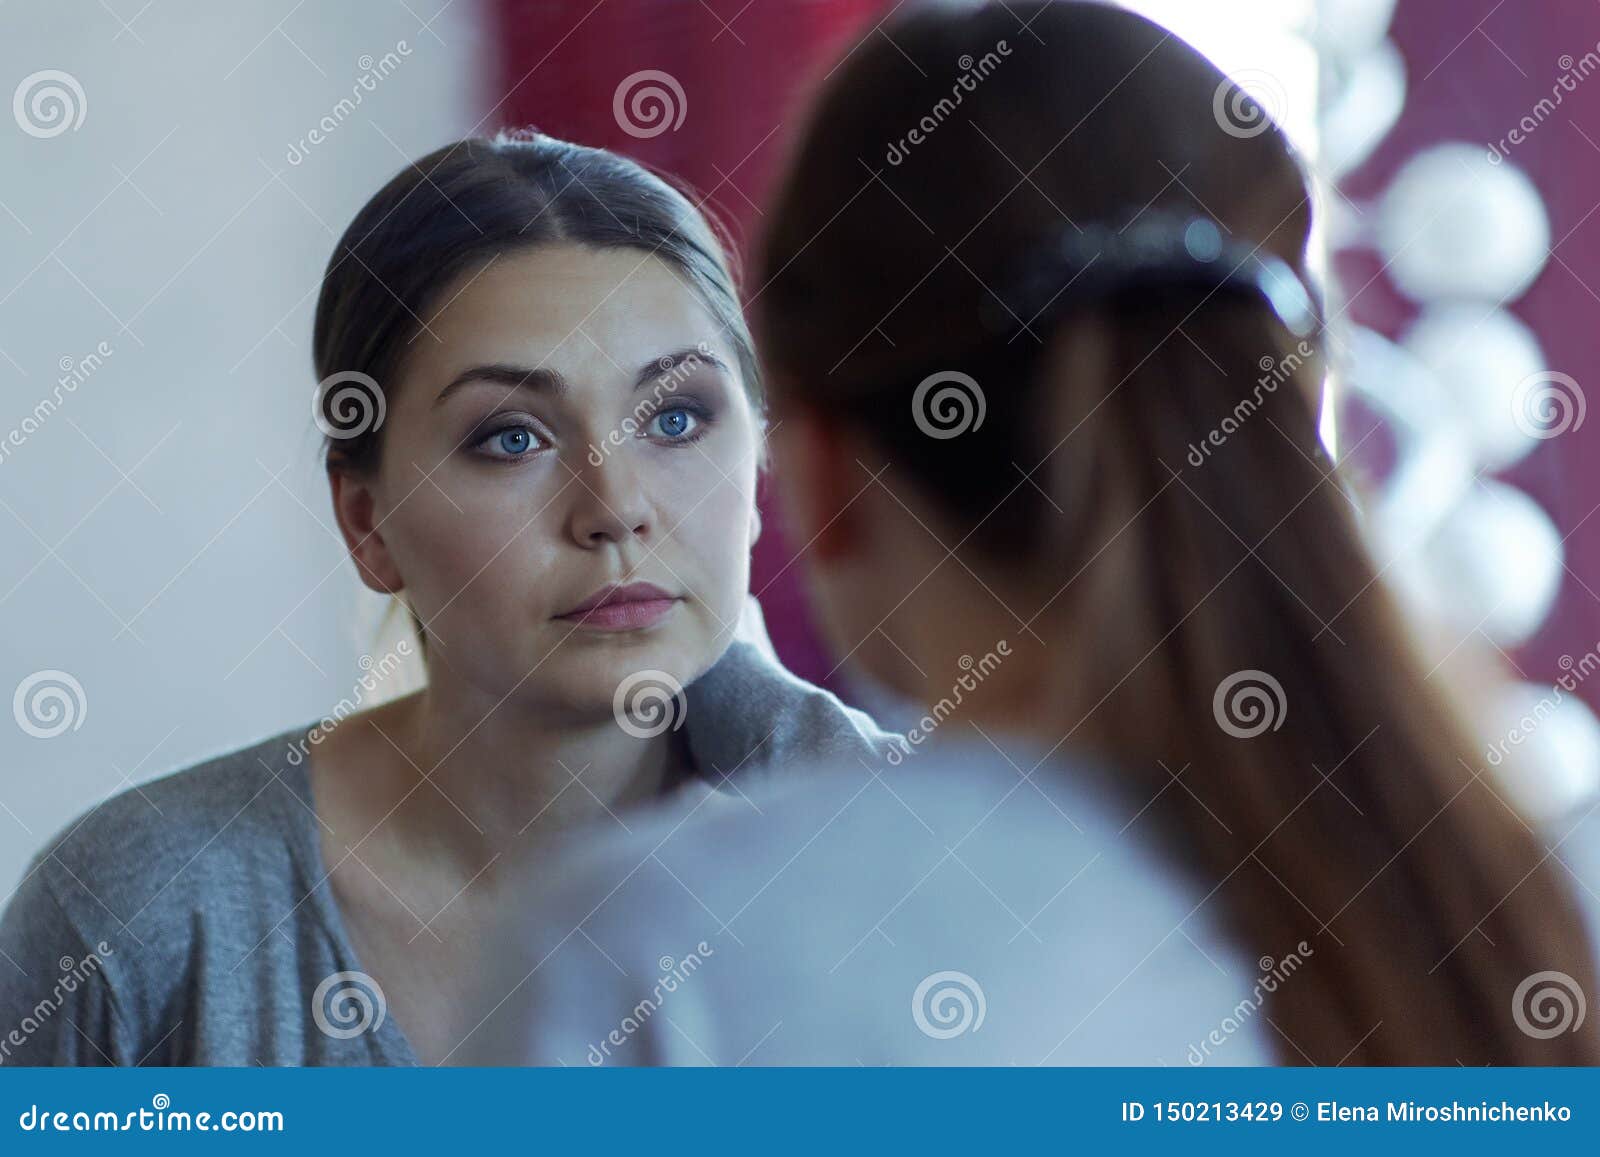 reflection of a young attractive caucasian woman looking into a mirror. wearing casual, beautiful blue eyes, serious look.